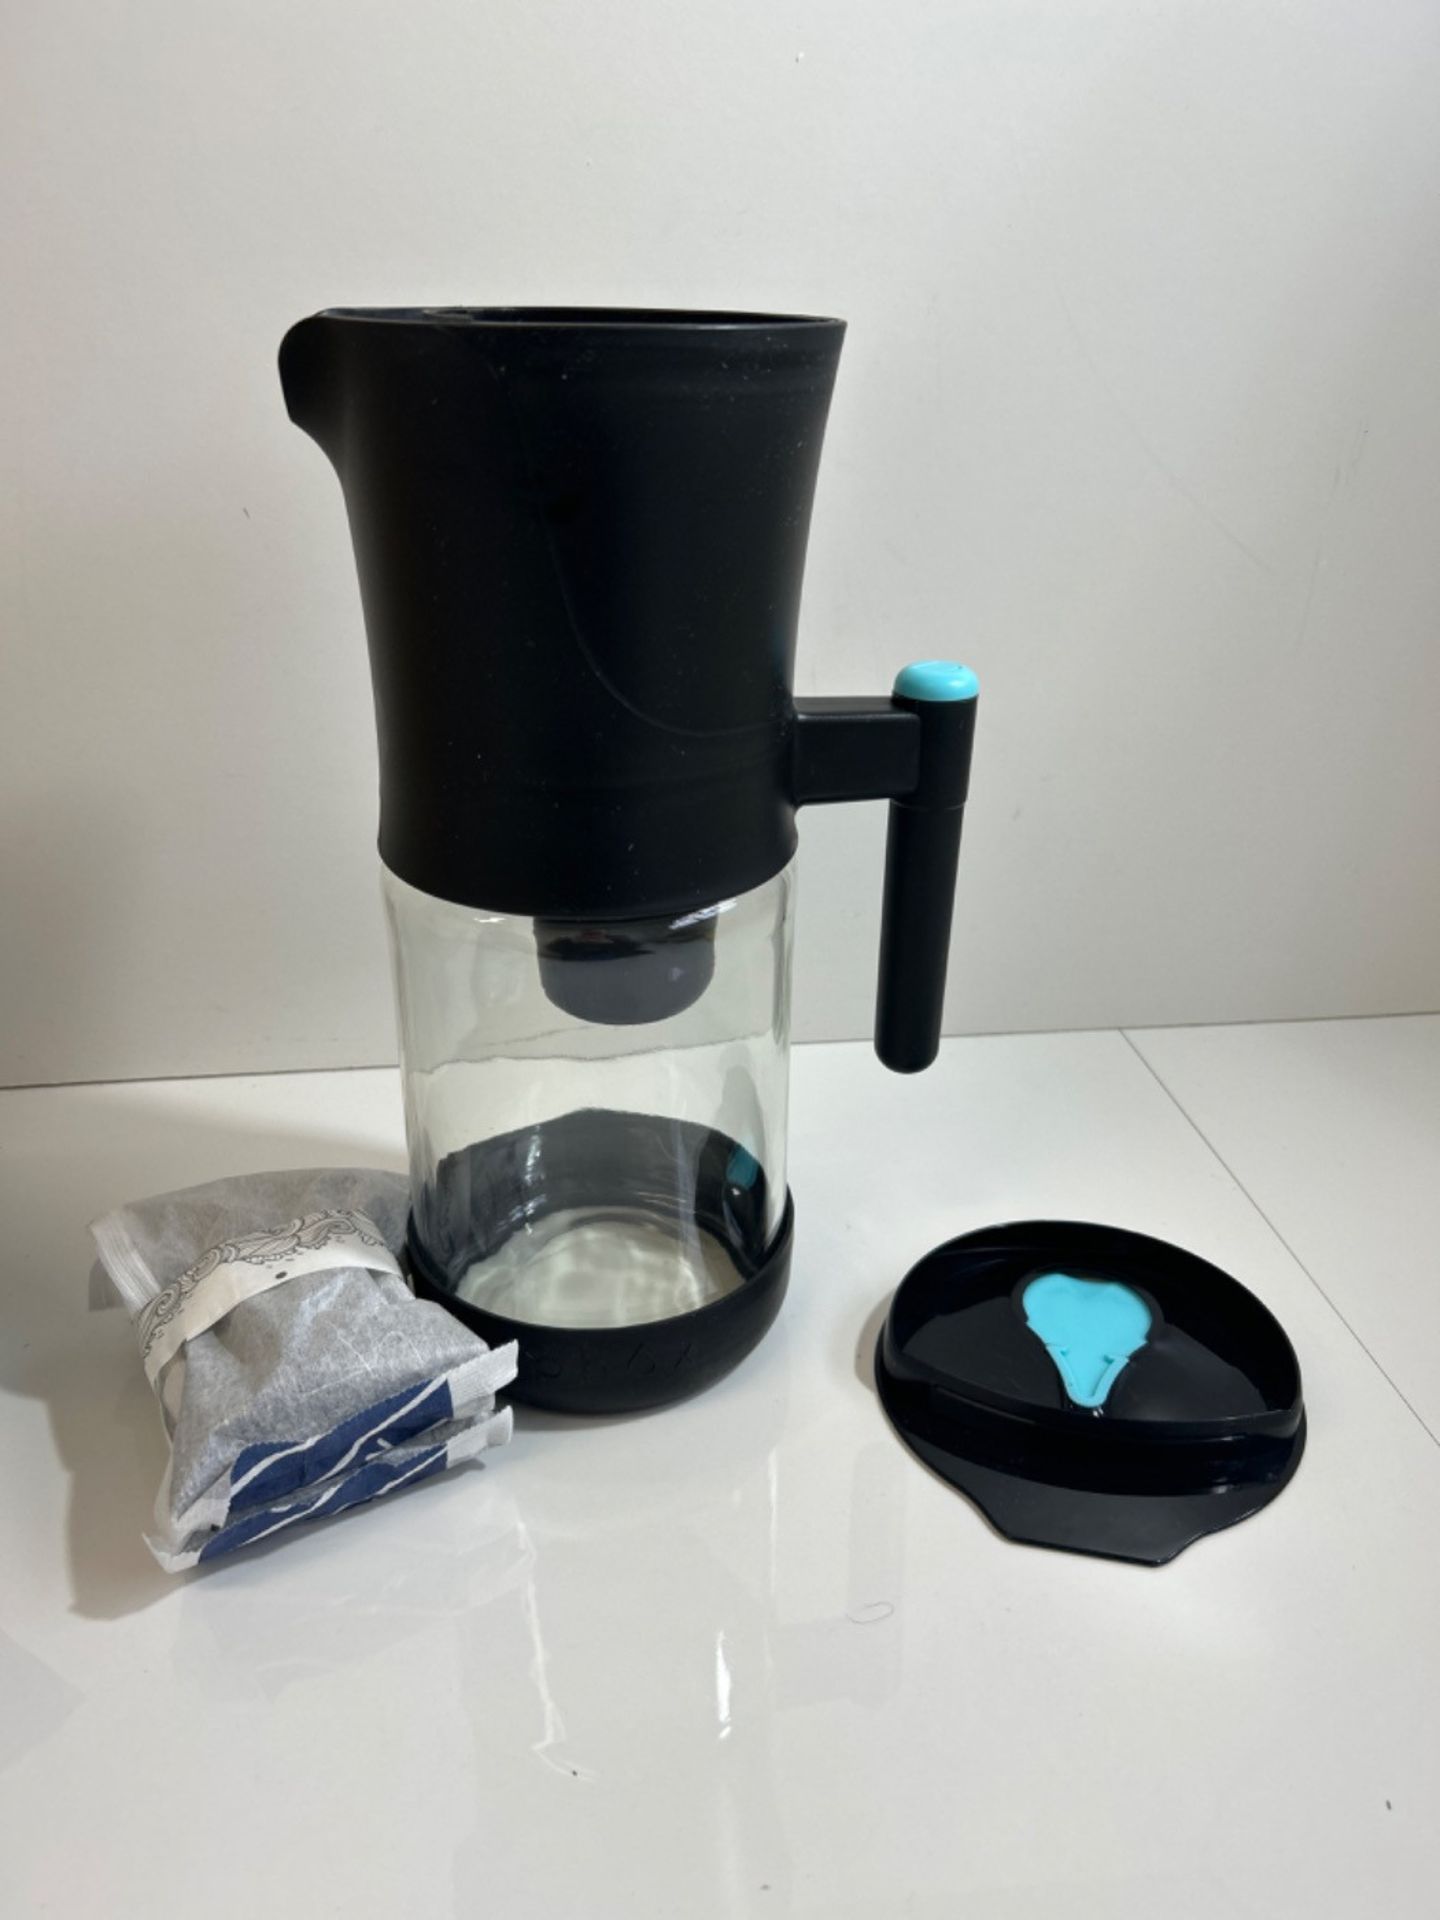 Phox V2 Water Filter | 2.2L Glass Water Filter Jug and Cartridge | 3 Month Supply (Clean Pack) - Bild 3 aus 3